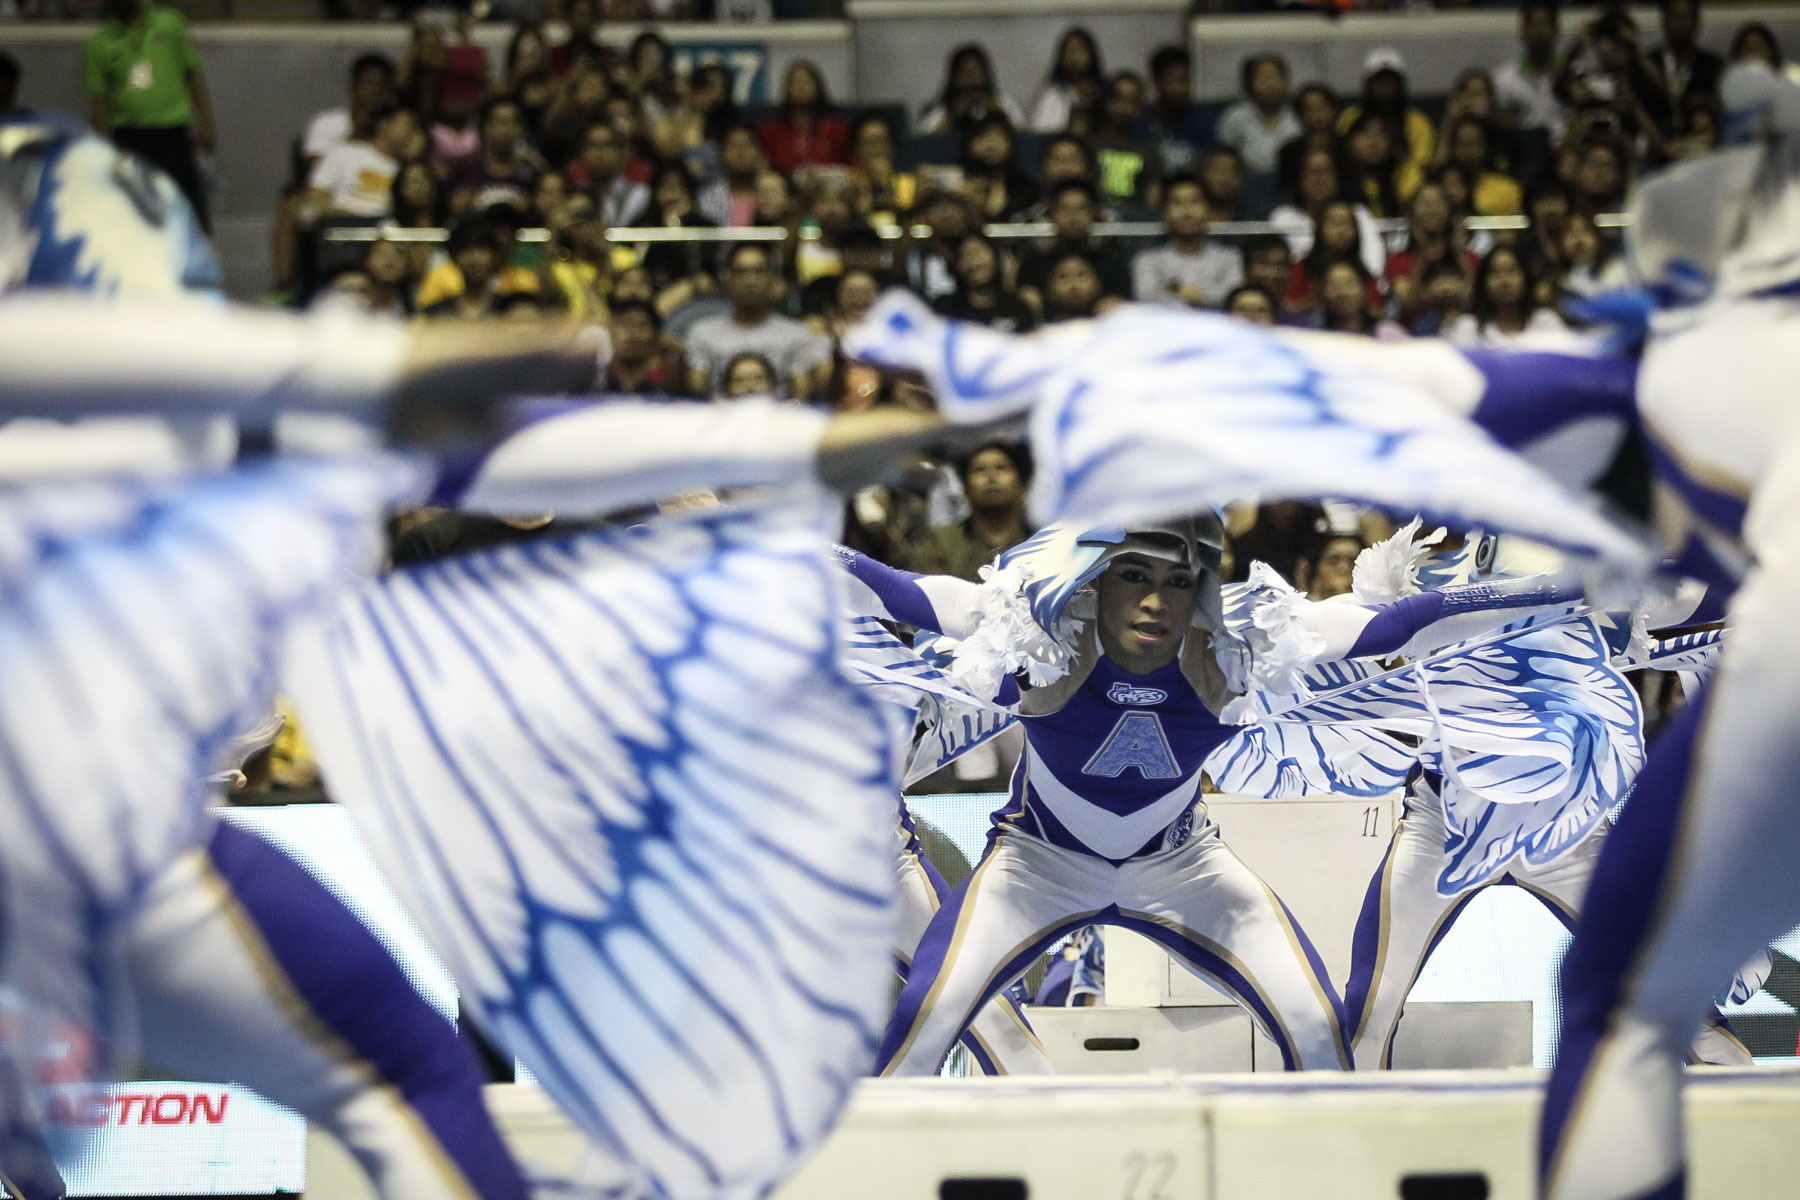 FLY, EAGLE, FLY. Ateneo brings out the props for its showing. Photo by Josh Albelda/Rappler 